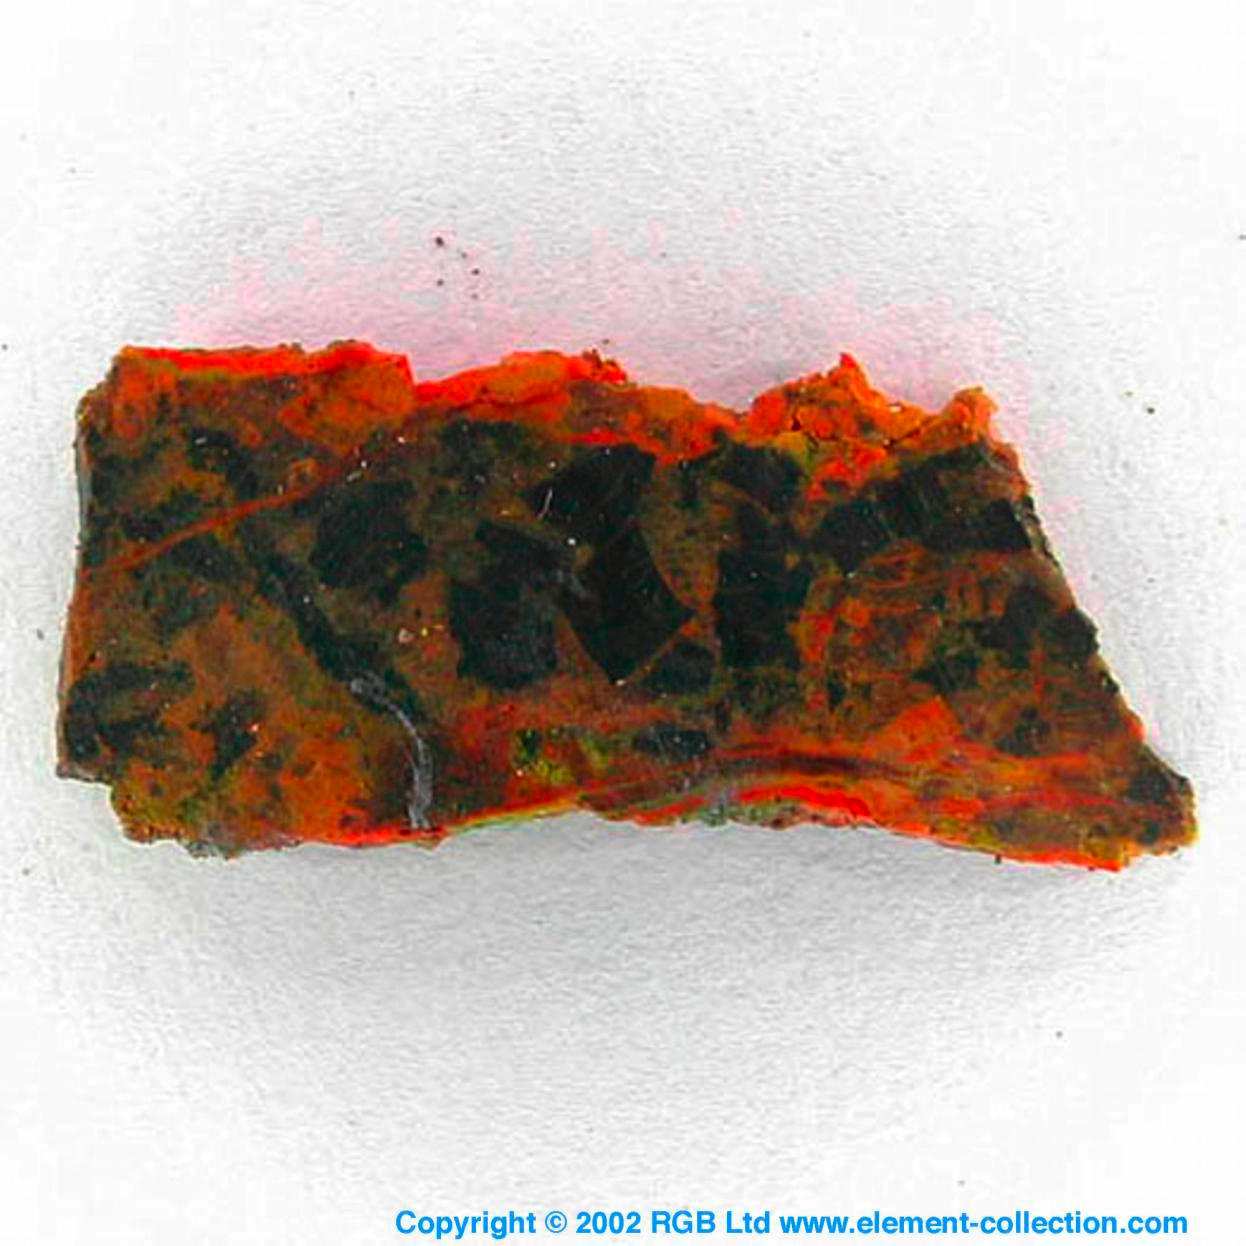 Astatine Sample from the RGB Set